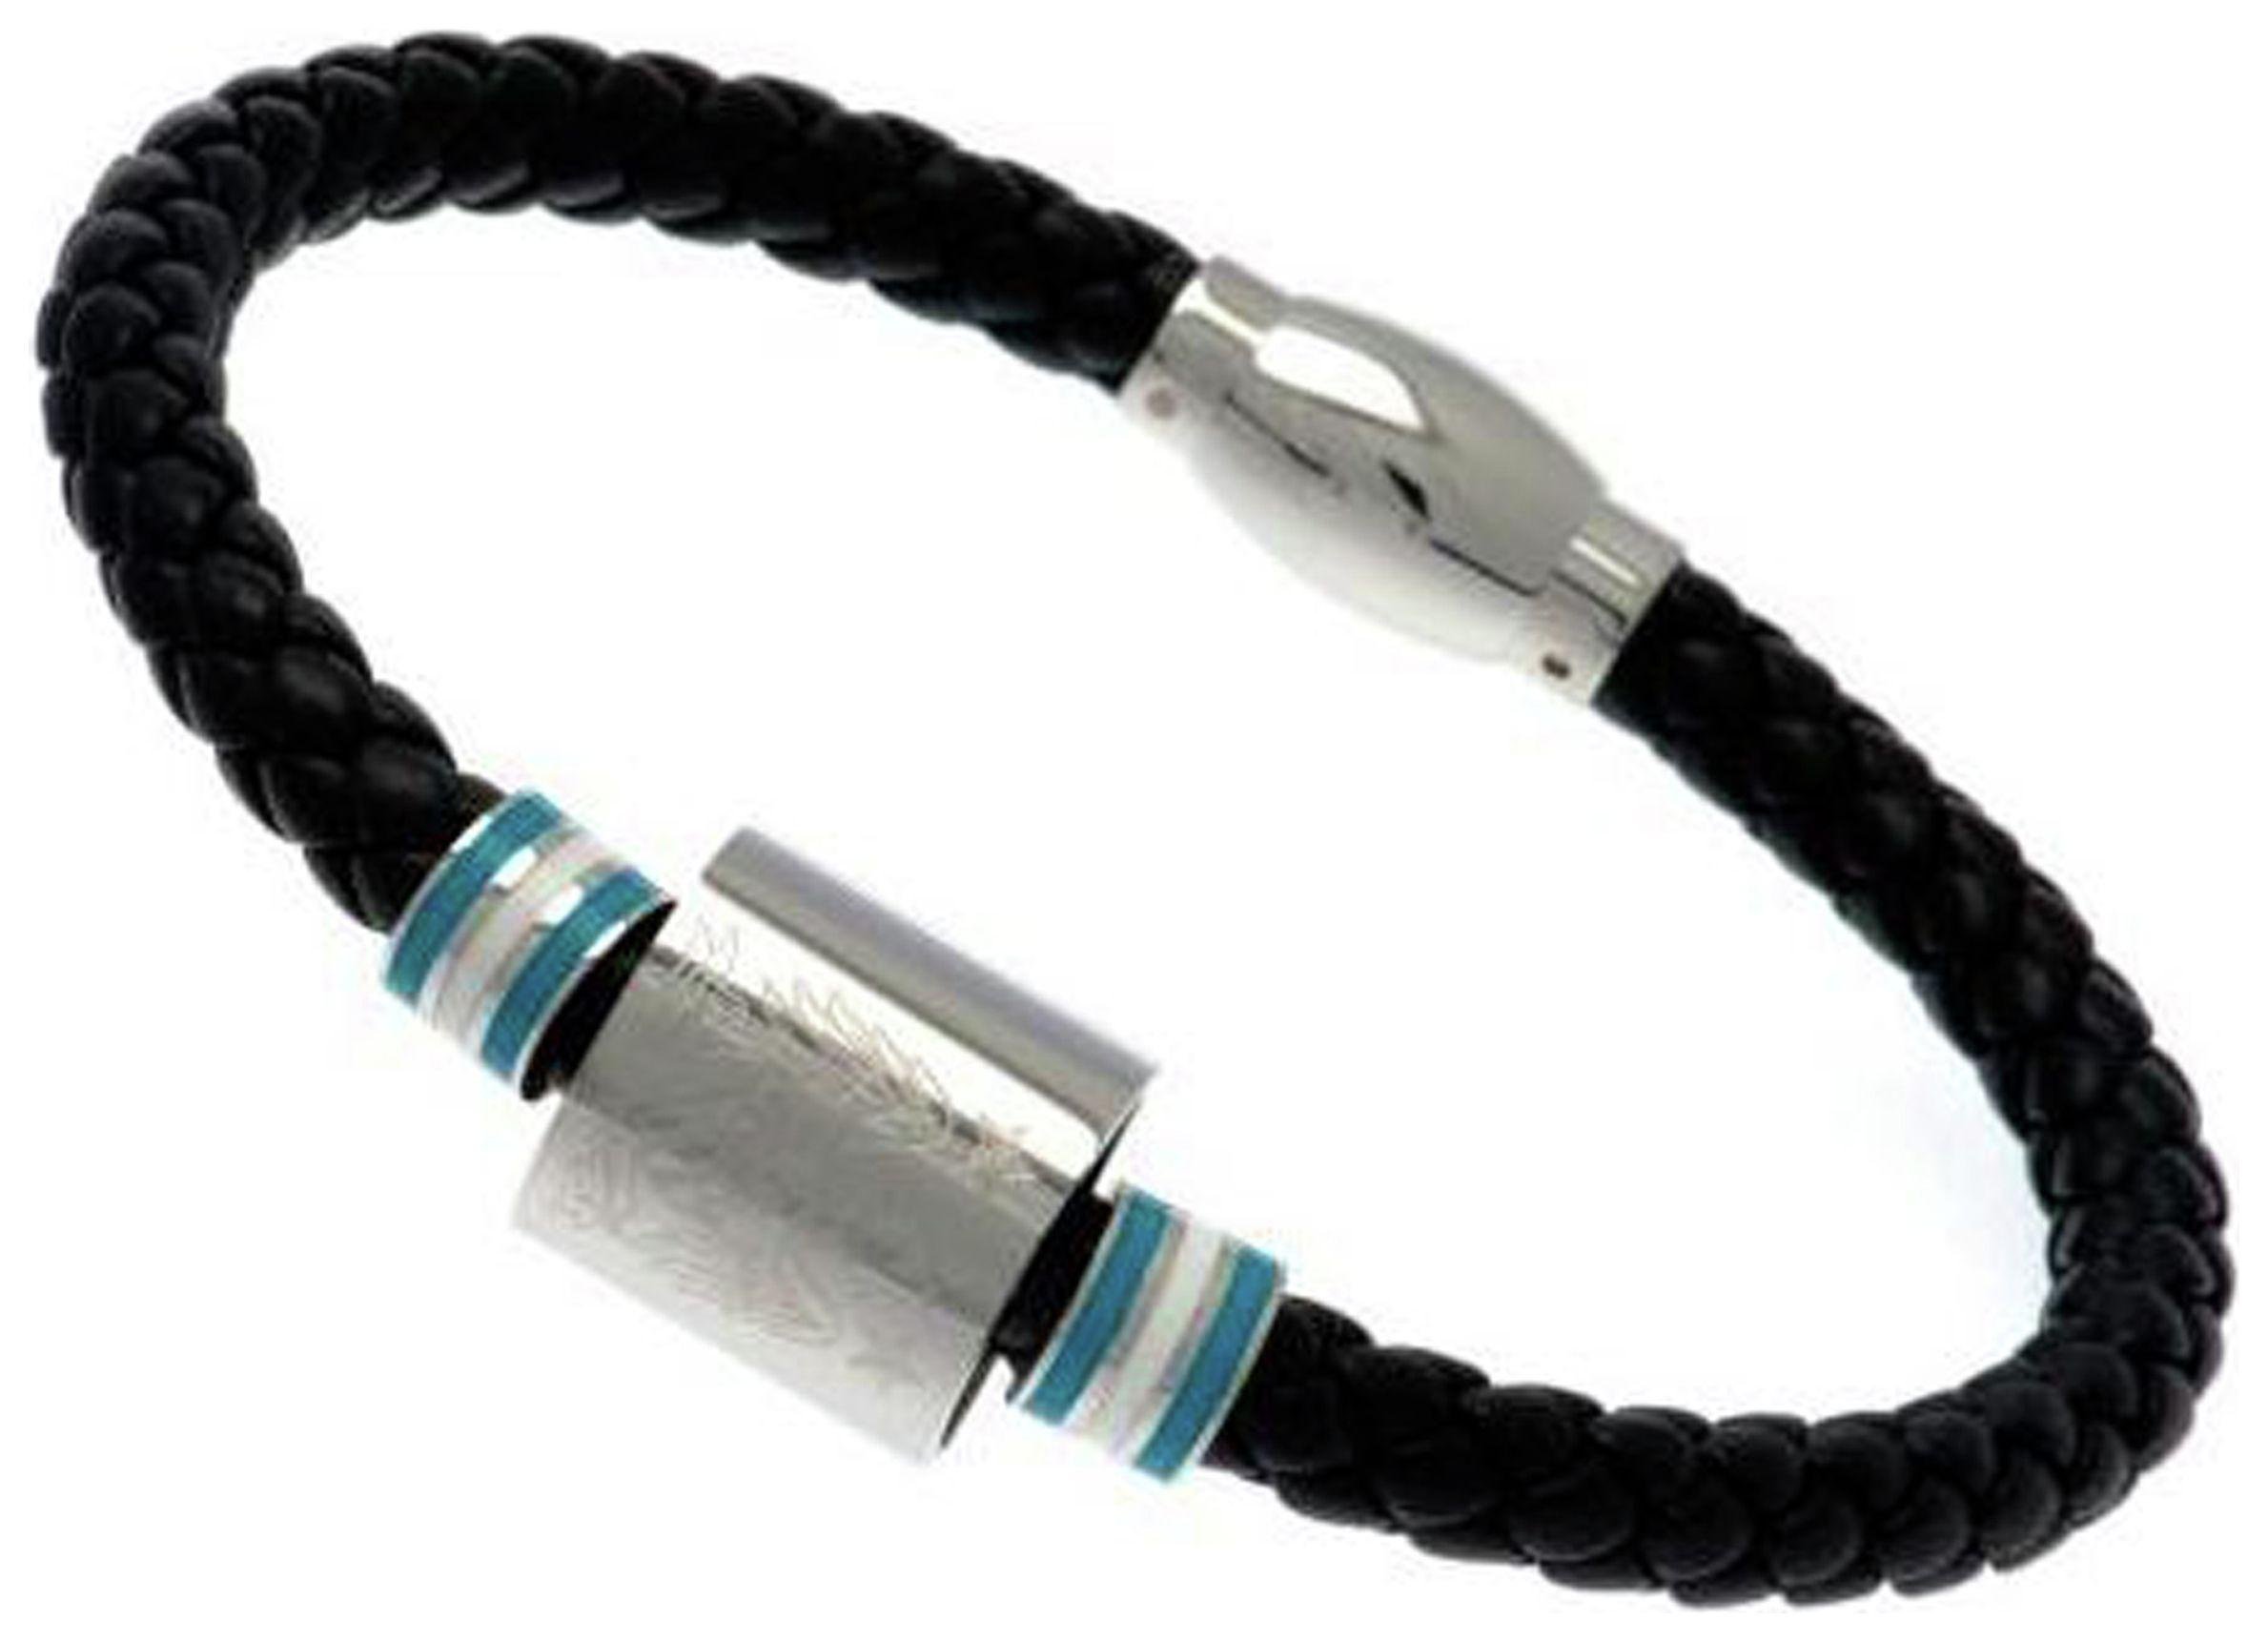 Stainless Steel and Leather Man City Bracelet